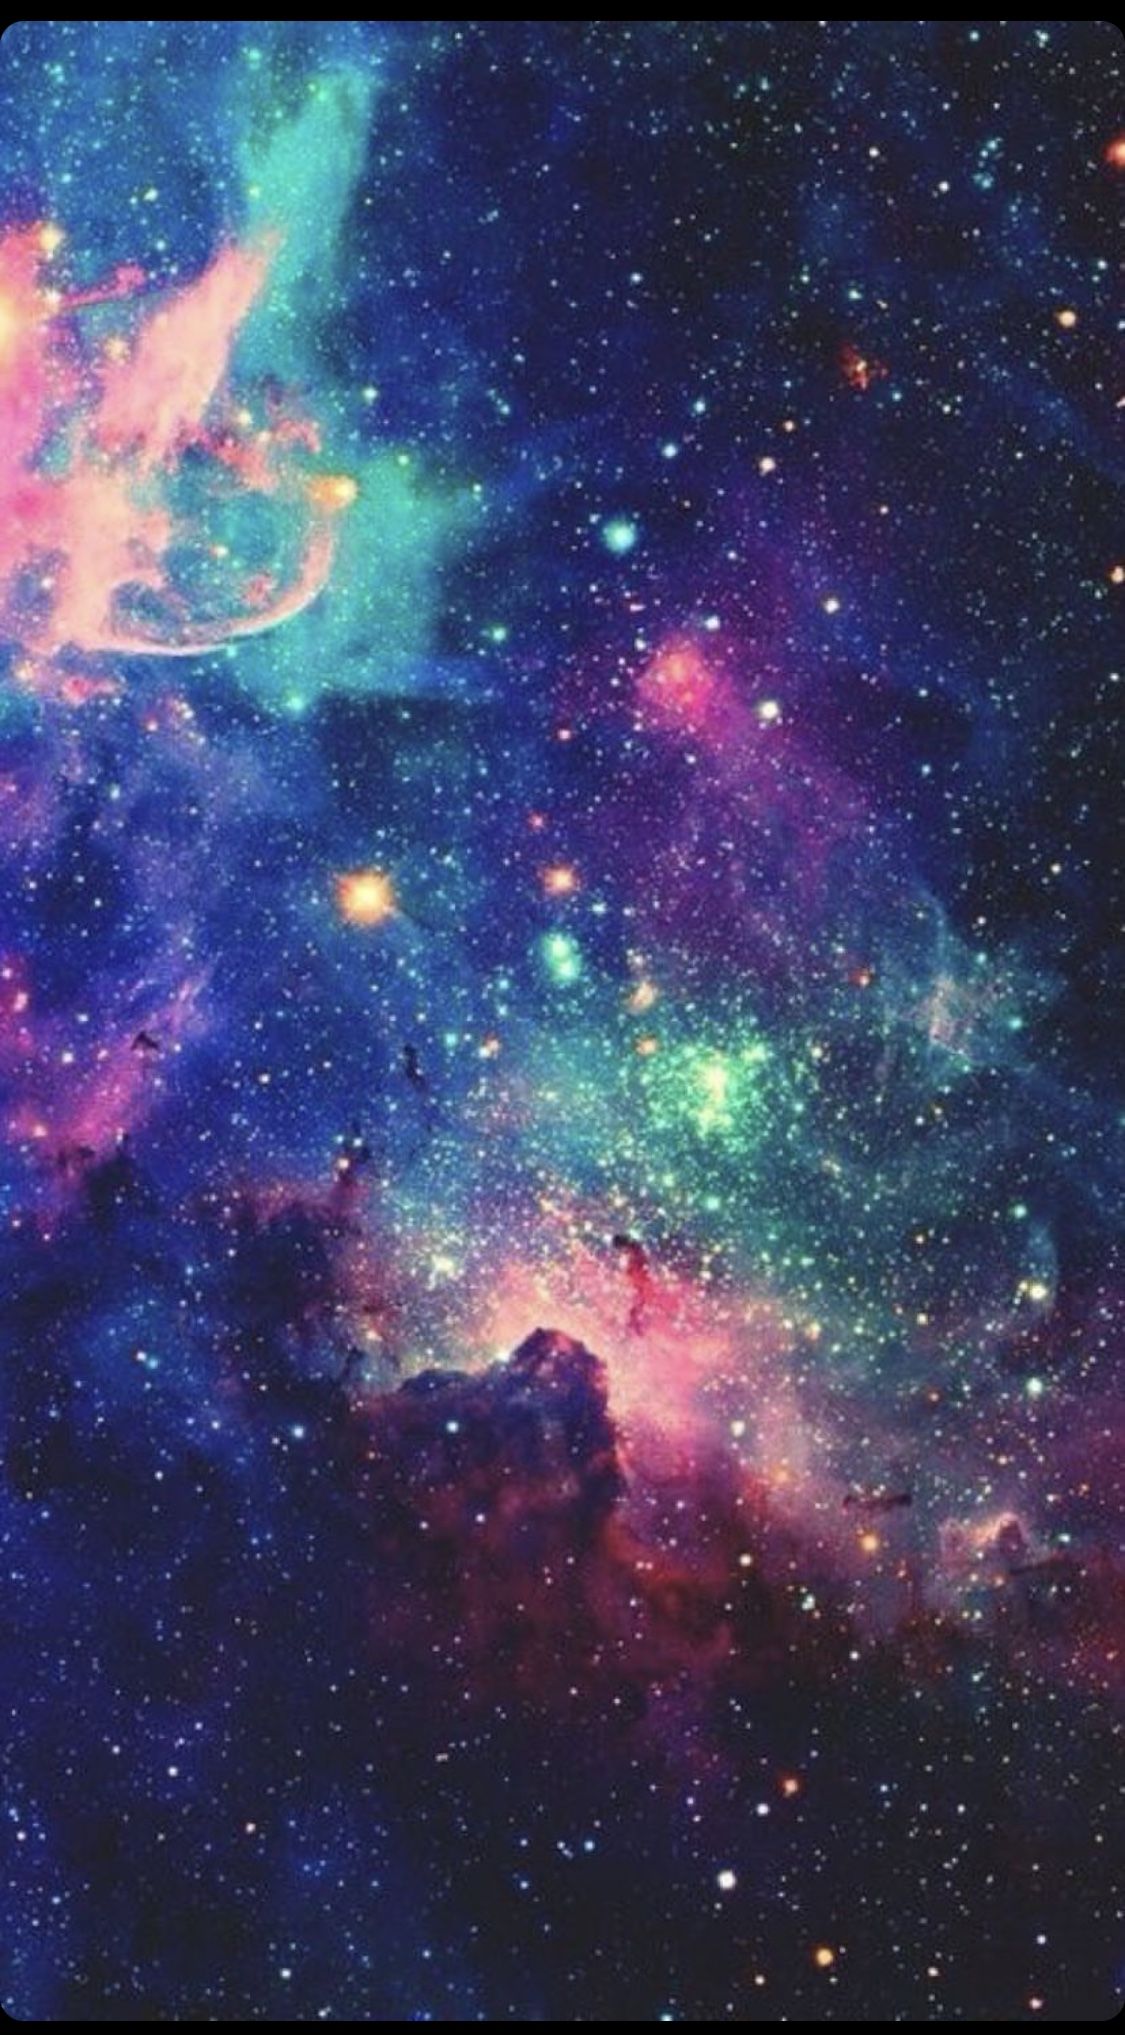 Iphone wallpaper galaxy, galaxy wallpaper, space wallpaper, backgrounds, aesthetic, pastel, background, aesthetic, wallpaper, phone background, galaxy background, galaxy aesthetic, galaxy phone background, galaxy phone wallpaper, galaxy aesthetic wallpaper, galaxy aesthetic phone wallpaper, galaxy aesthetic phone background - Galaxy